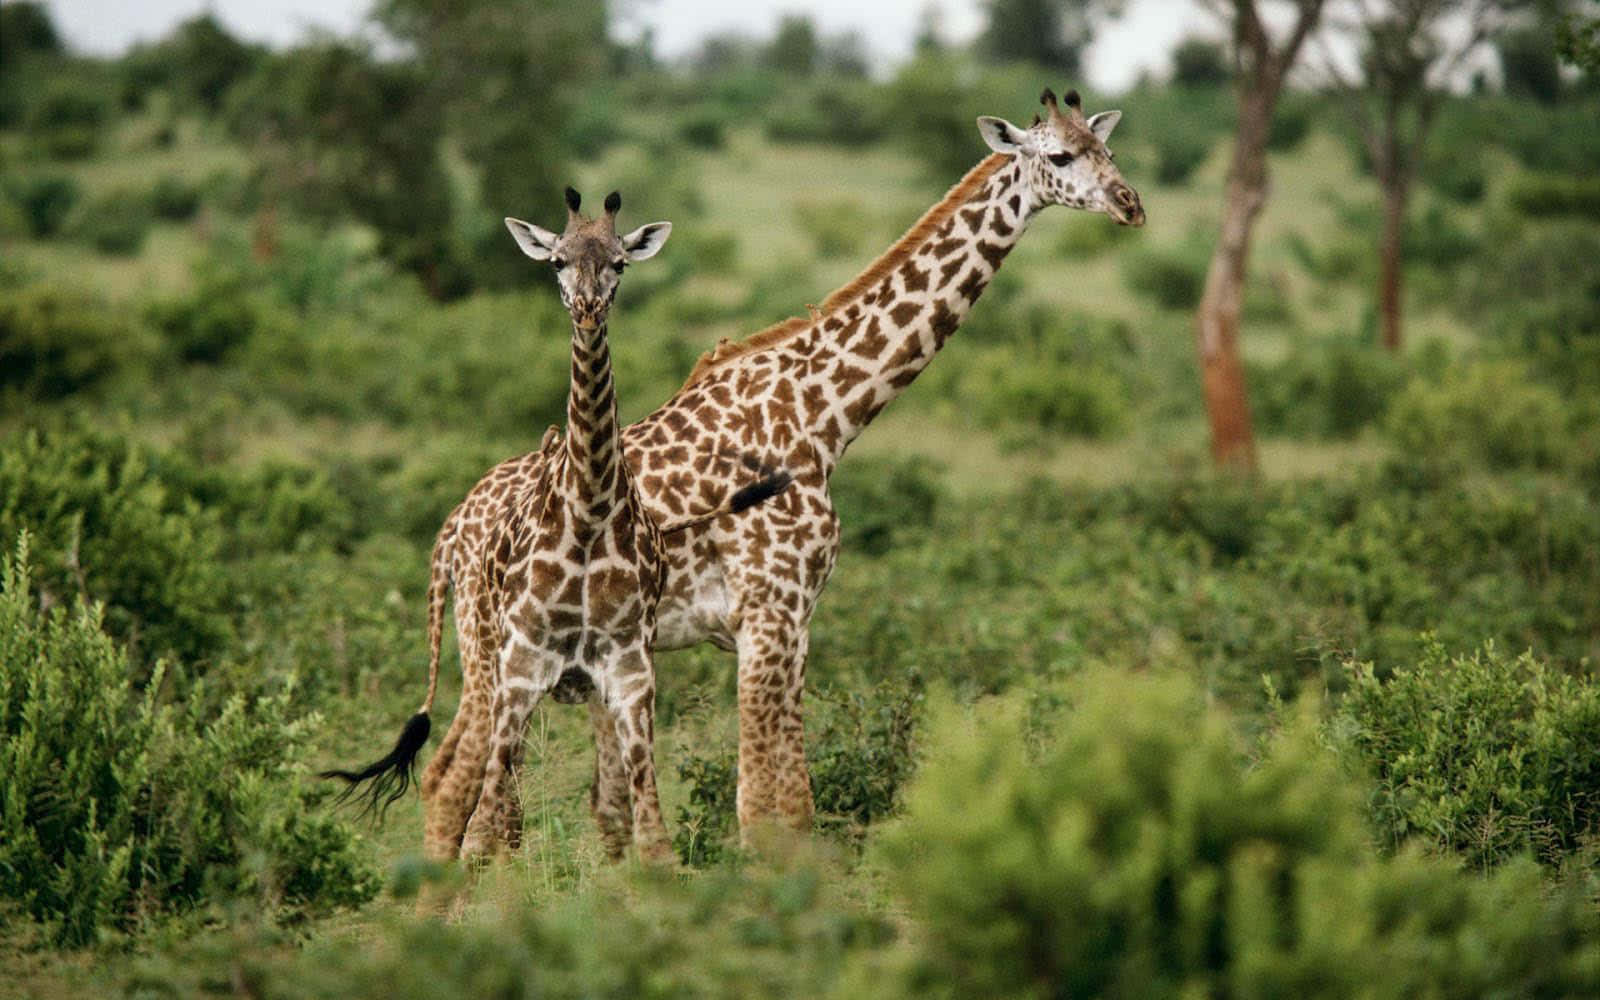 two giraffes standing in a field with trees